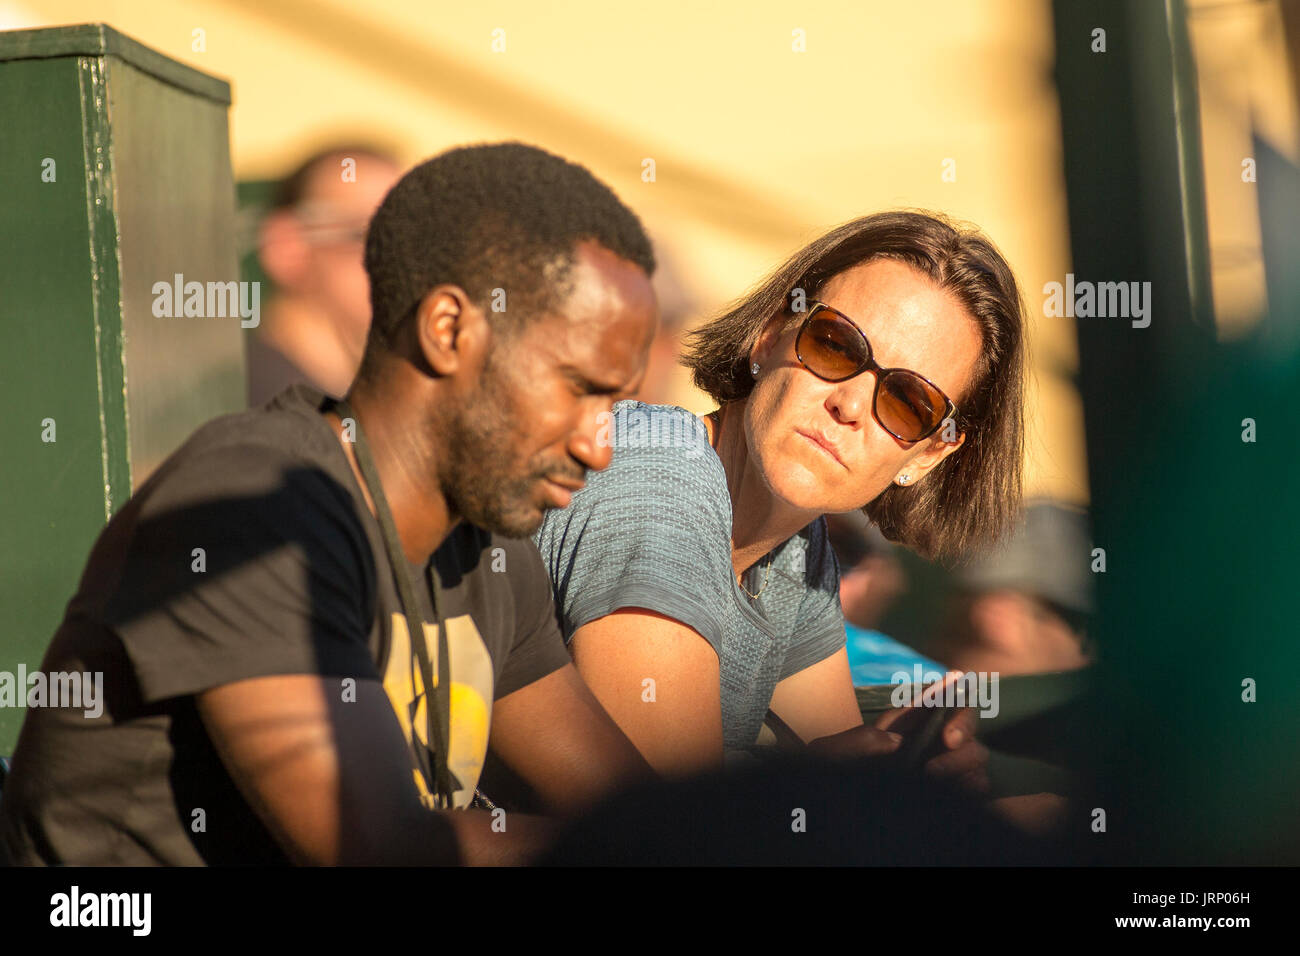 August 05, 2017: Lindsay Davenport in attendance at the Madison Keys (USA) versus Garbine Muguruza (ESP) match at the Bank of the West Classic being played at the Taube Tennis Stadium in Stanford, California. © Mal Taam/TennisClix/CSM Stock Photo